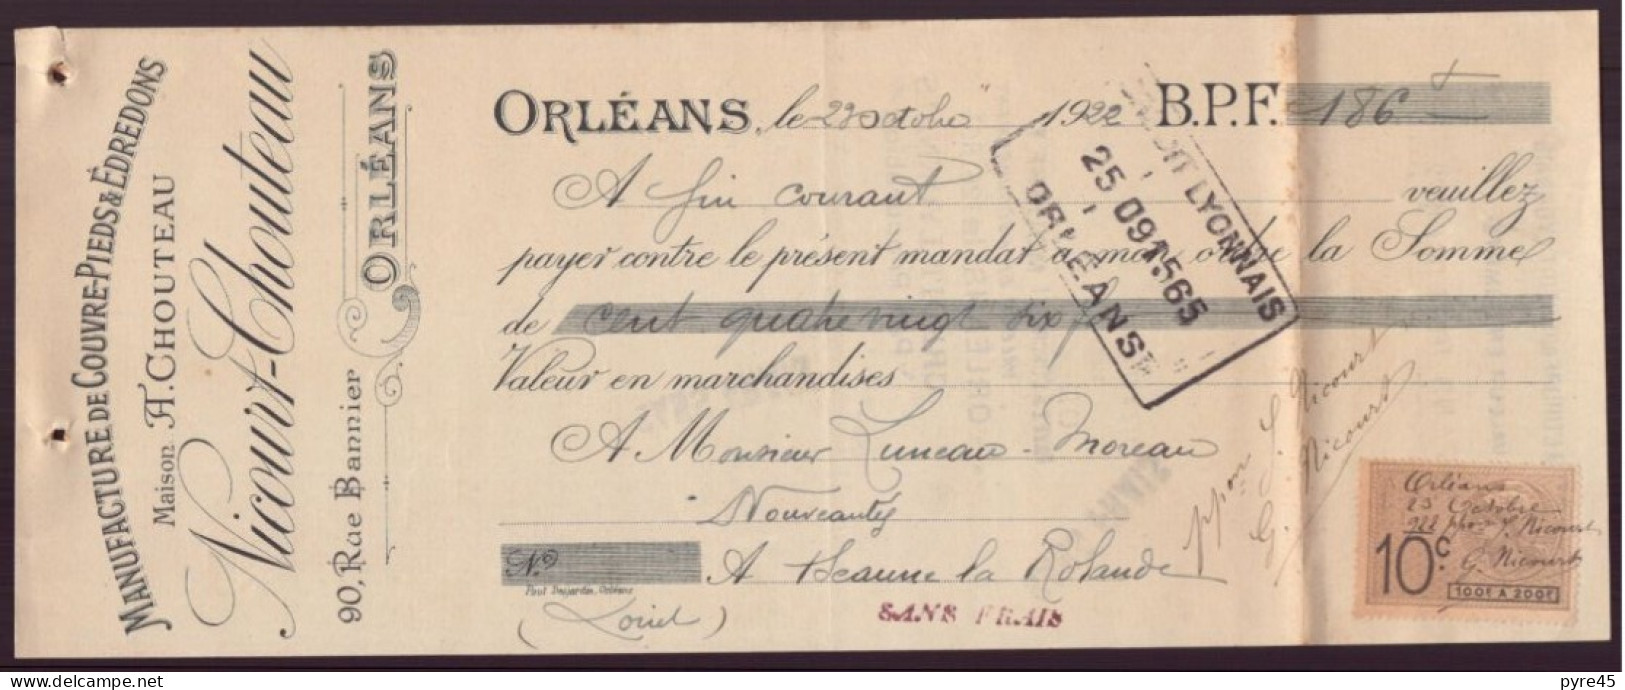 CHEQUE DU 29 / 10 / 1922 MANUFACTURE DE COUVRE PIEDS & EDREDONS A ORLEANS - Cheques & Traveler's Cheques